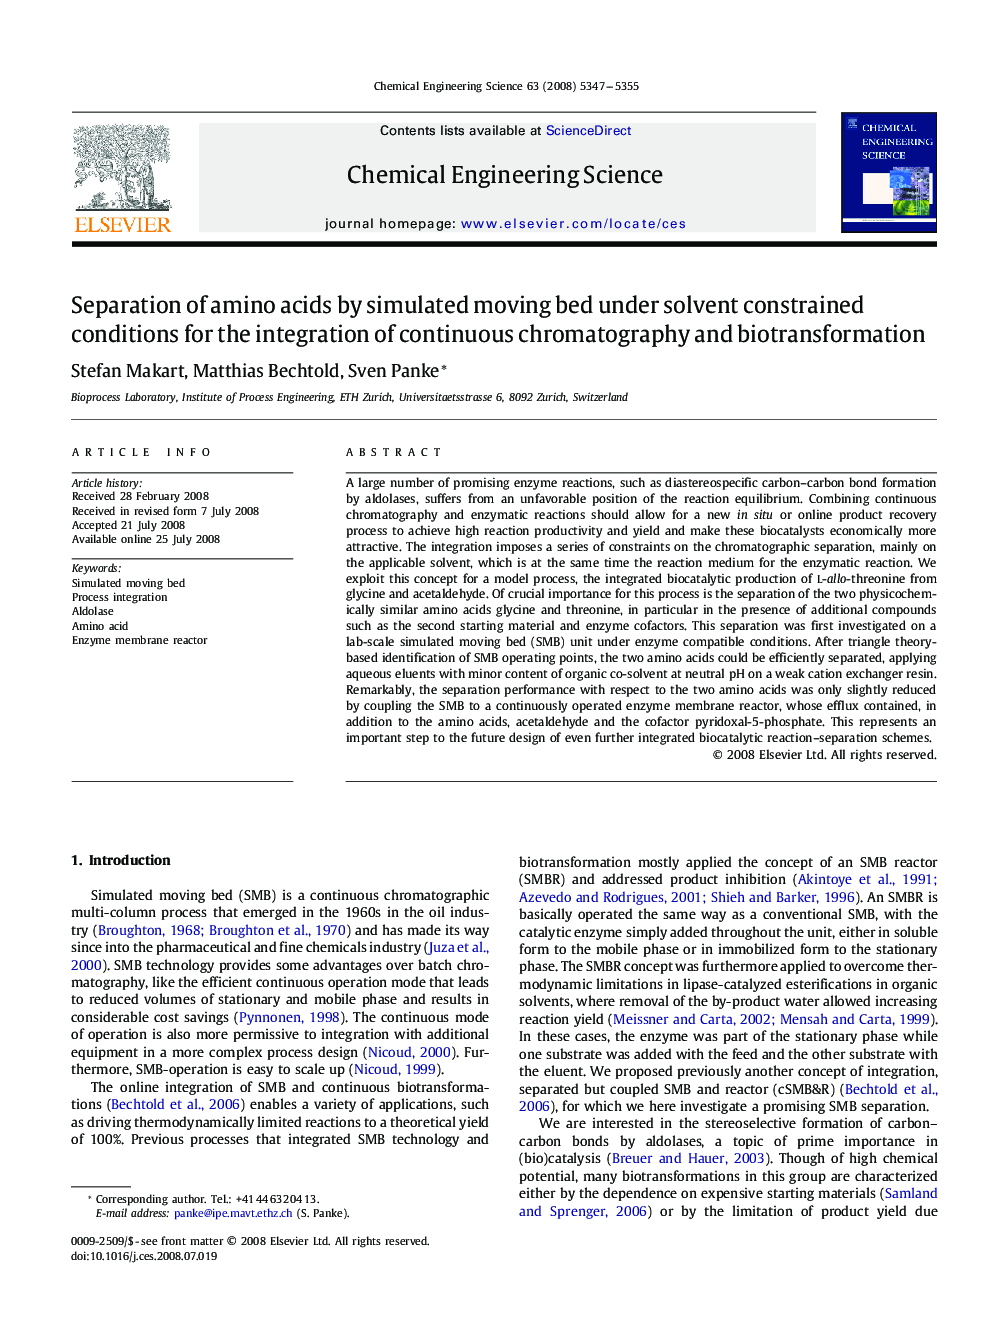 Separation of amino acids by simulated moving bed under solvent constrained conditions for the integration of continuous chromatography and biotransformation